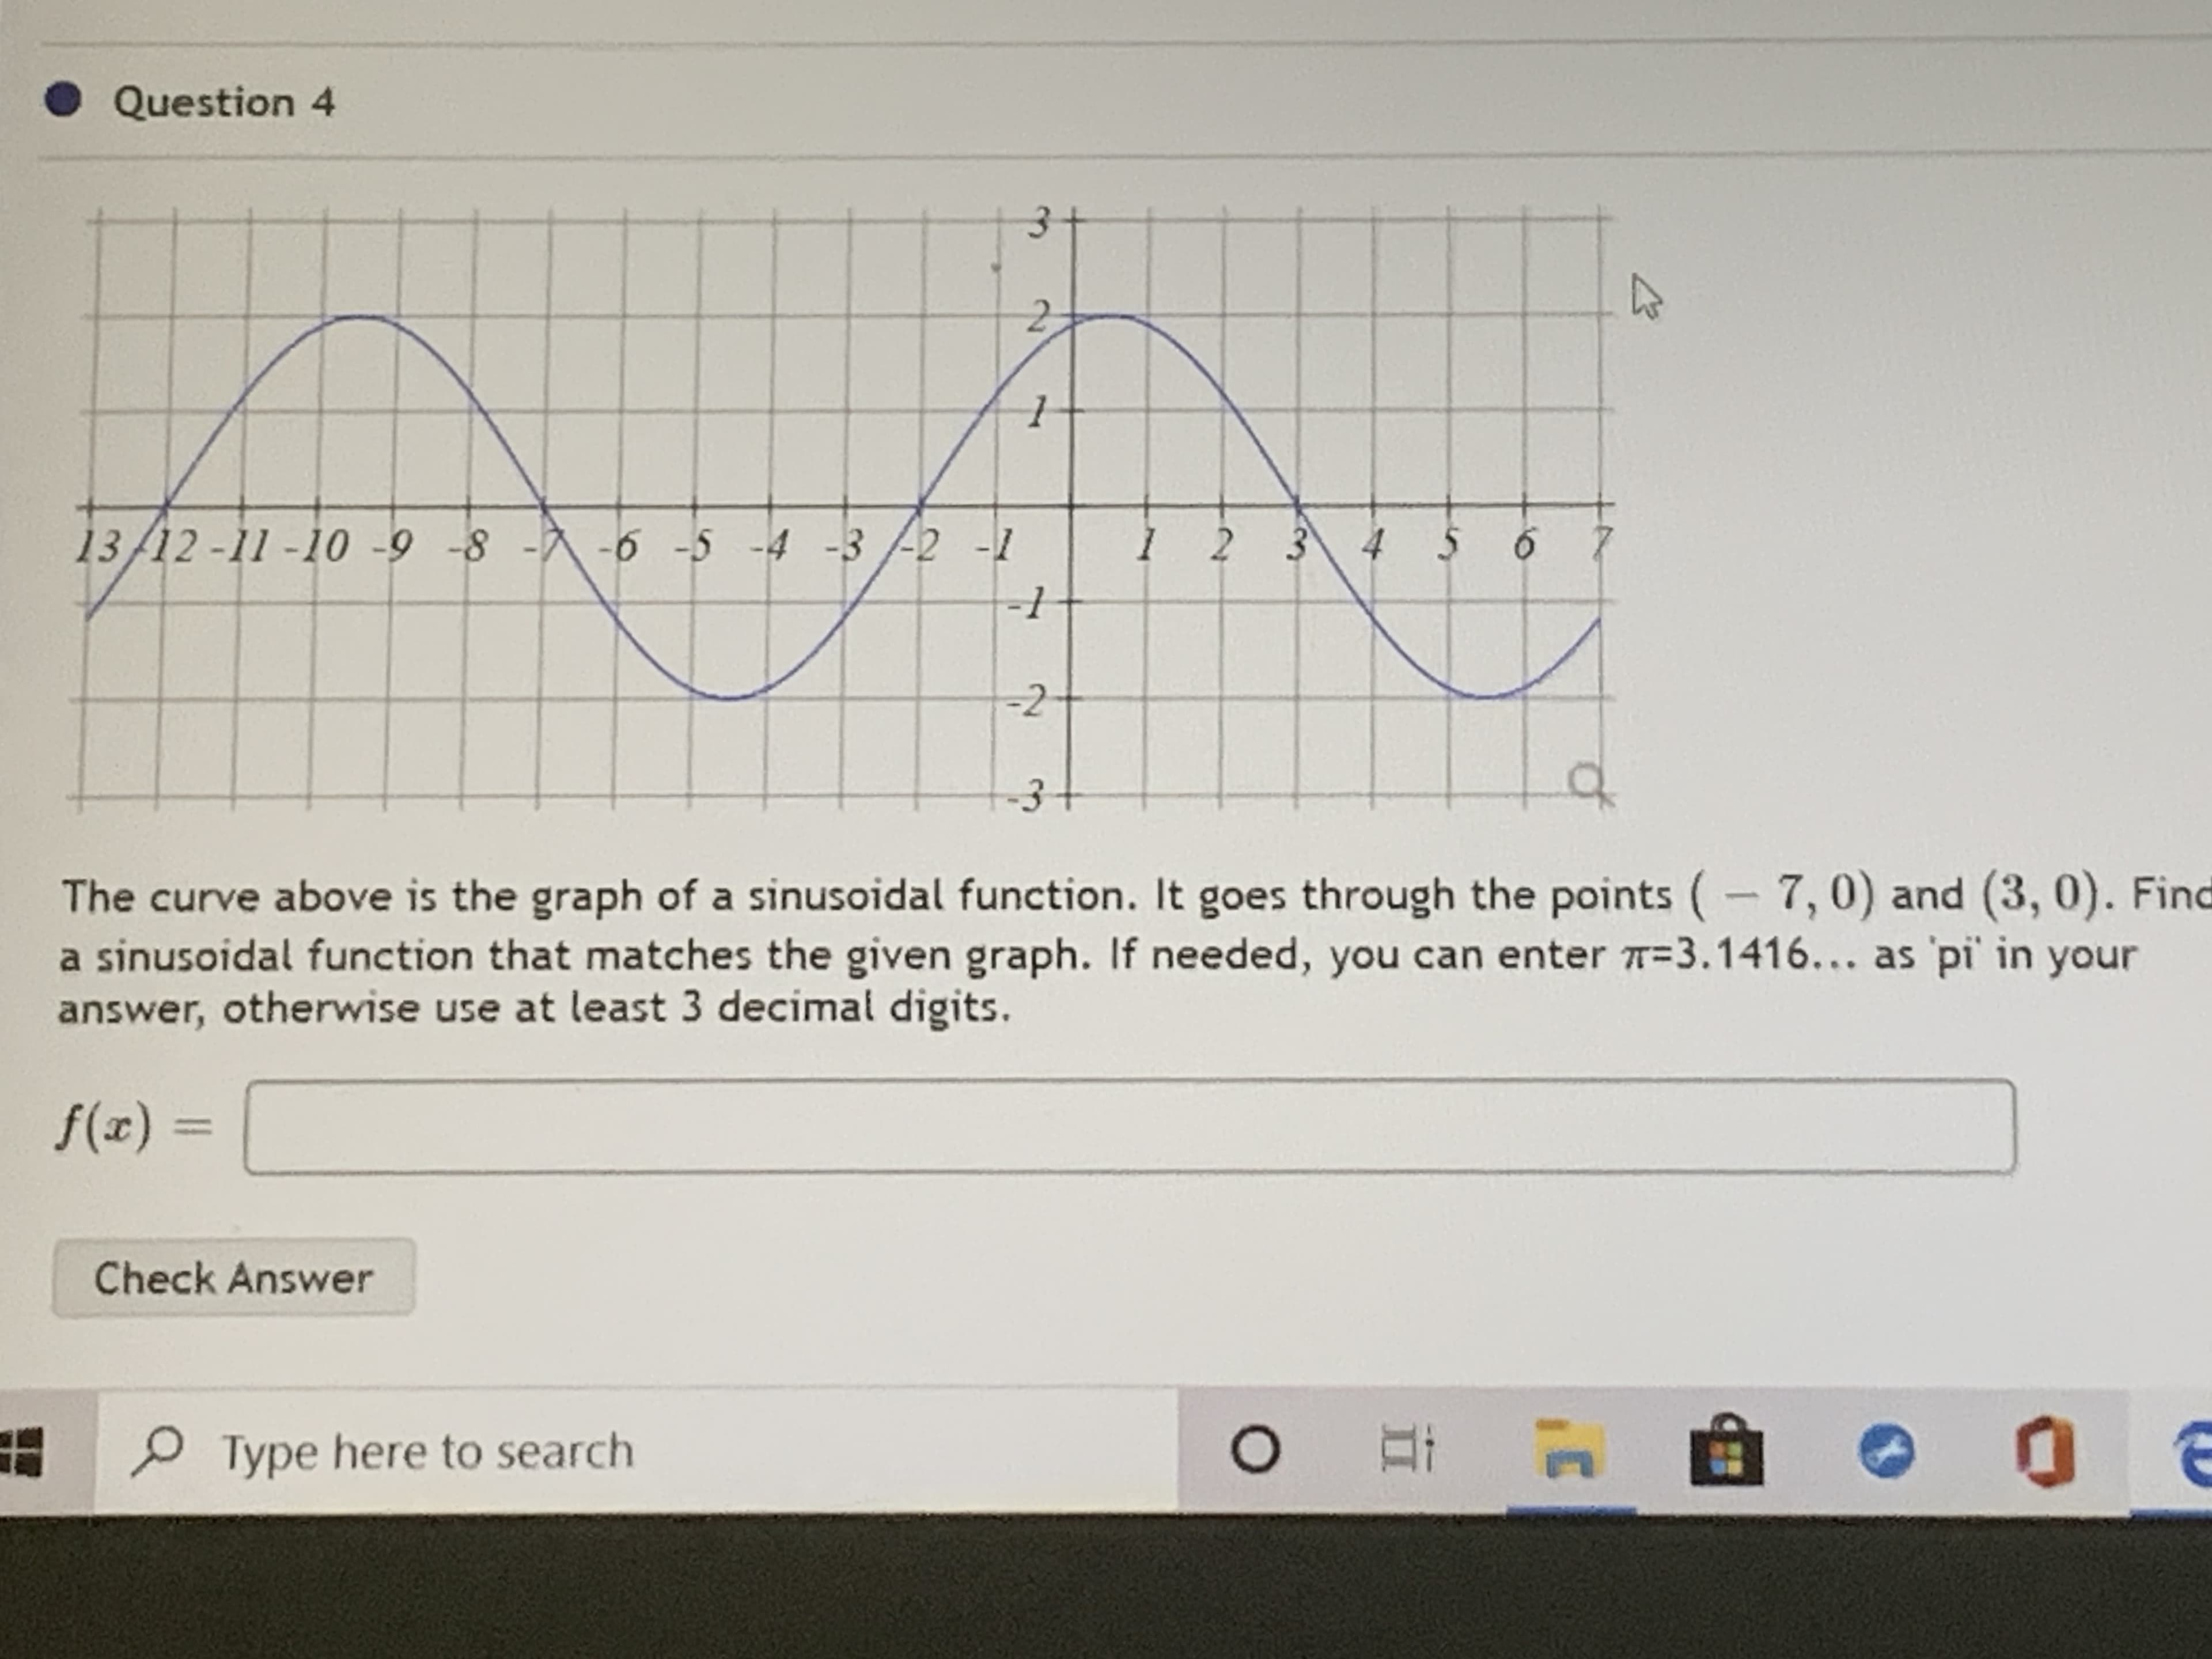 13/12-11-10 -9 -8 - -6 -5 -4 -3/-2 -1
1 2 3 4 5 6 7
-2
The curve above is the graph of a sinusoidal function. It goes through the points (-7,0) and (3, 0). Fin
a sinusoidal function that matches the given graph. If needed, you can enter T=3.1416... as 'pi' in your
answer, otherwise use at least 3 decimal digits.
f(x) :
%3D
